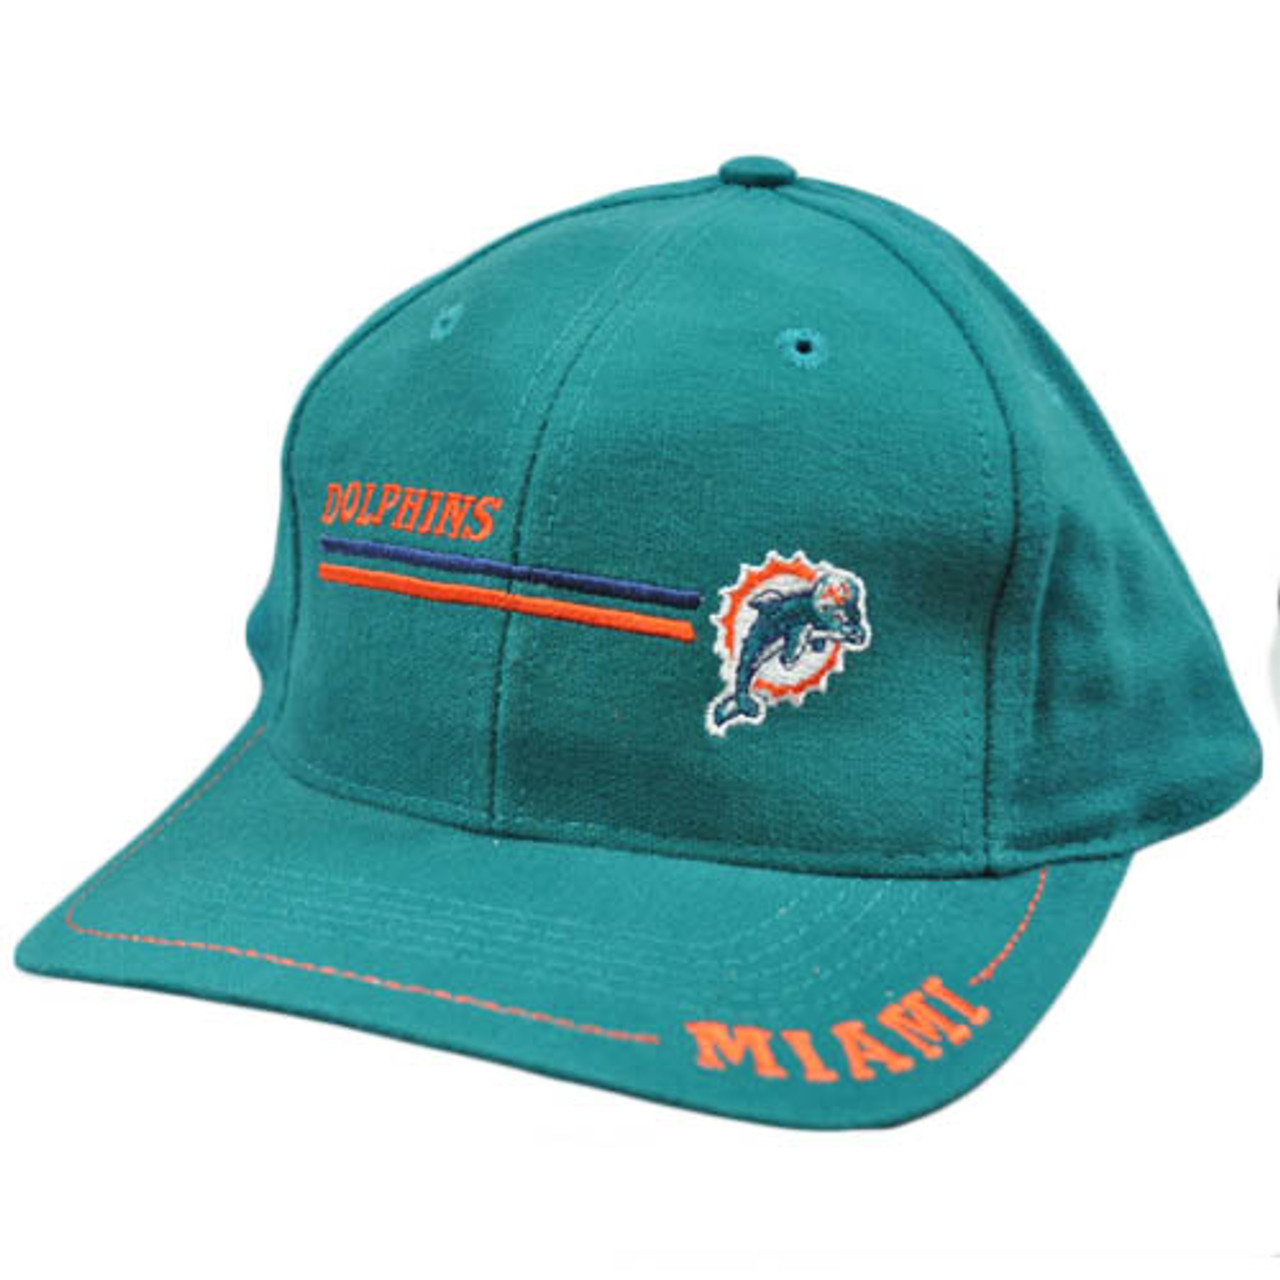 Miami Dolphins Hats, Dolphins Hats